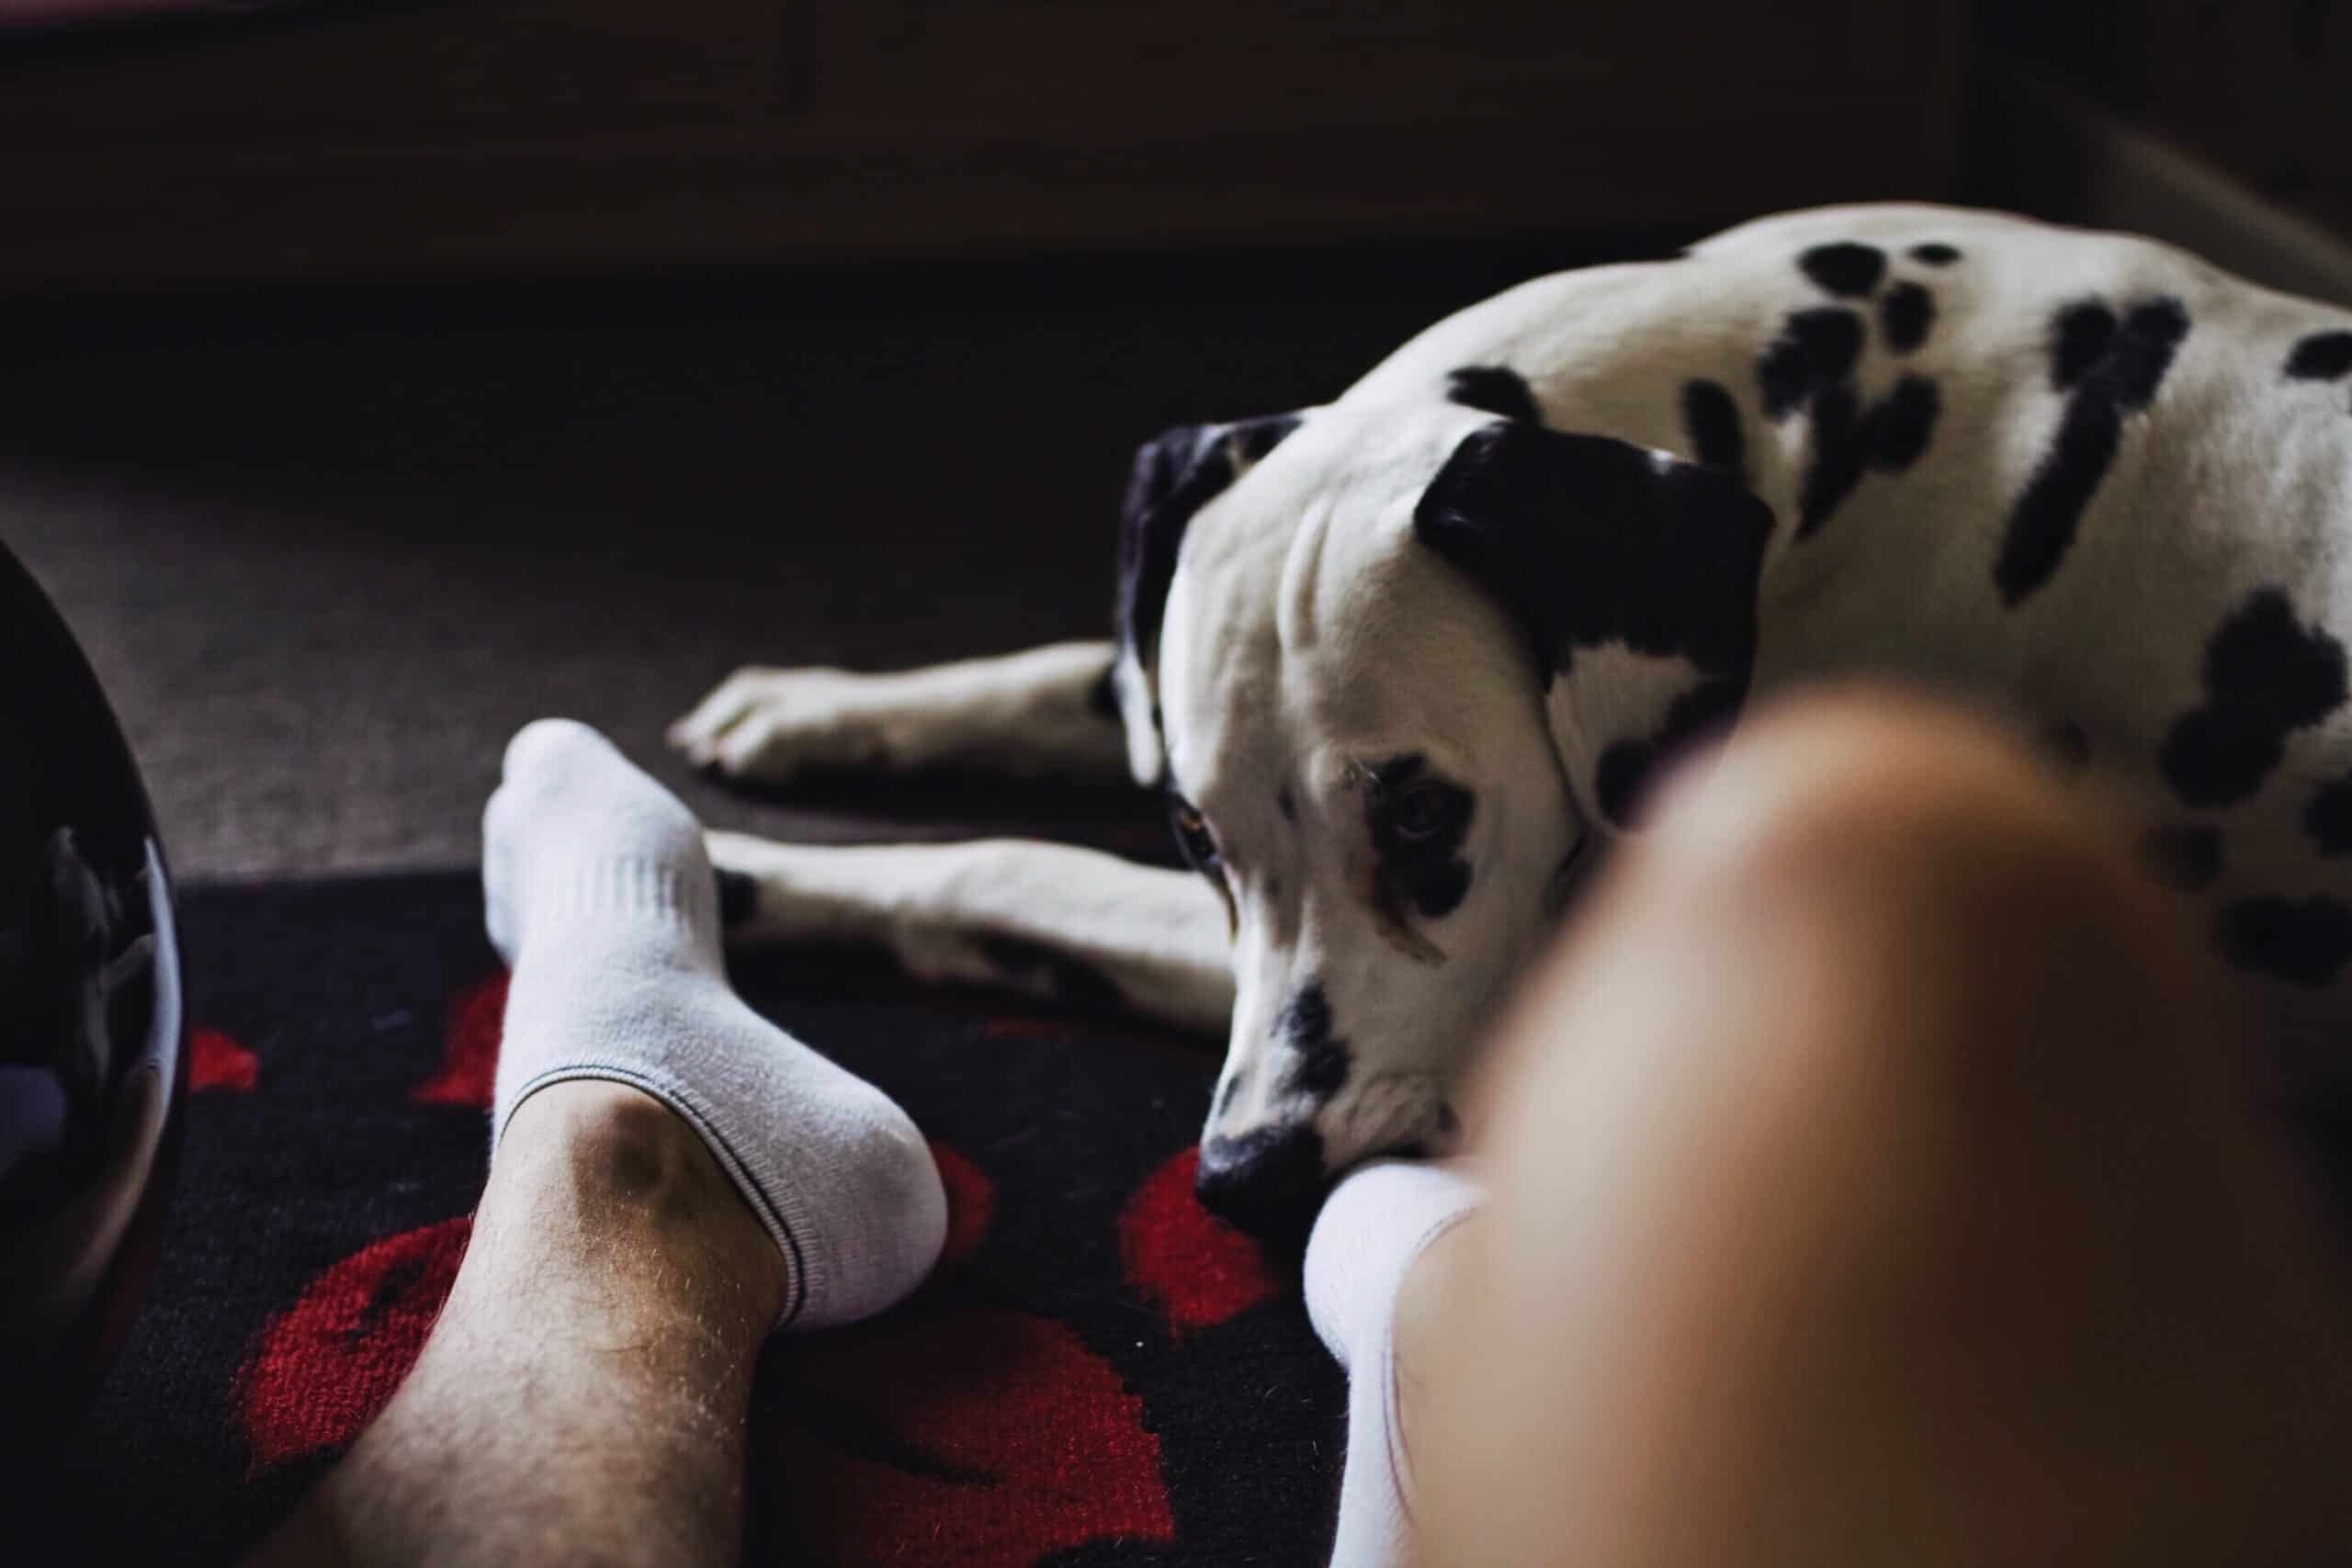 Who would we recommend getting a Dalmatian?